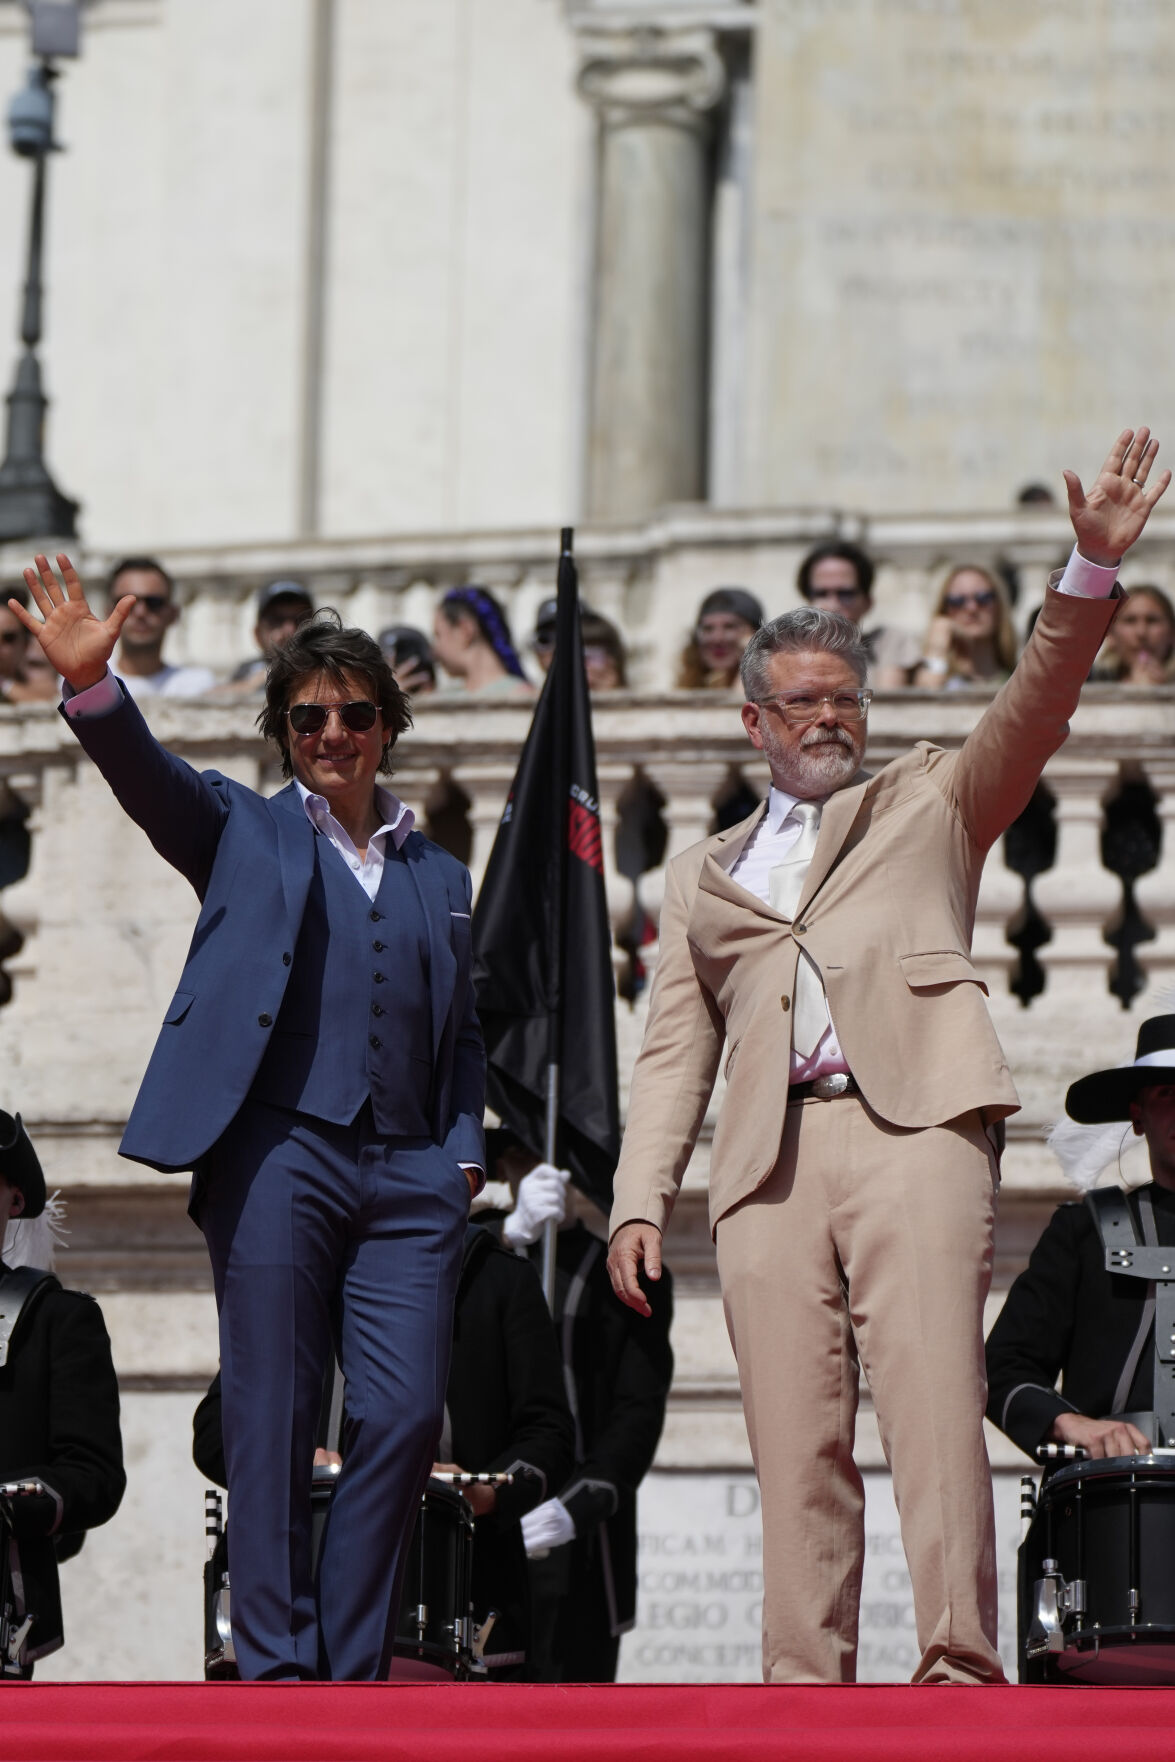 US producer and actor Tom Cruise (L) and US film director Christopher McQuarrie pose at Spanish Steps ahead of the premiere of "Mission: Impossible - Dead Reckoning Part One" movie in Rome, on June 19, 2023.